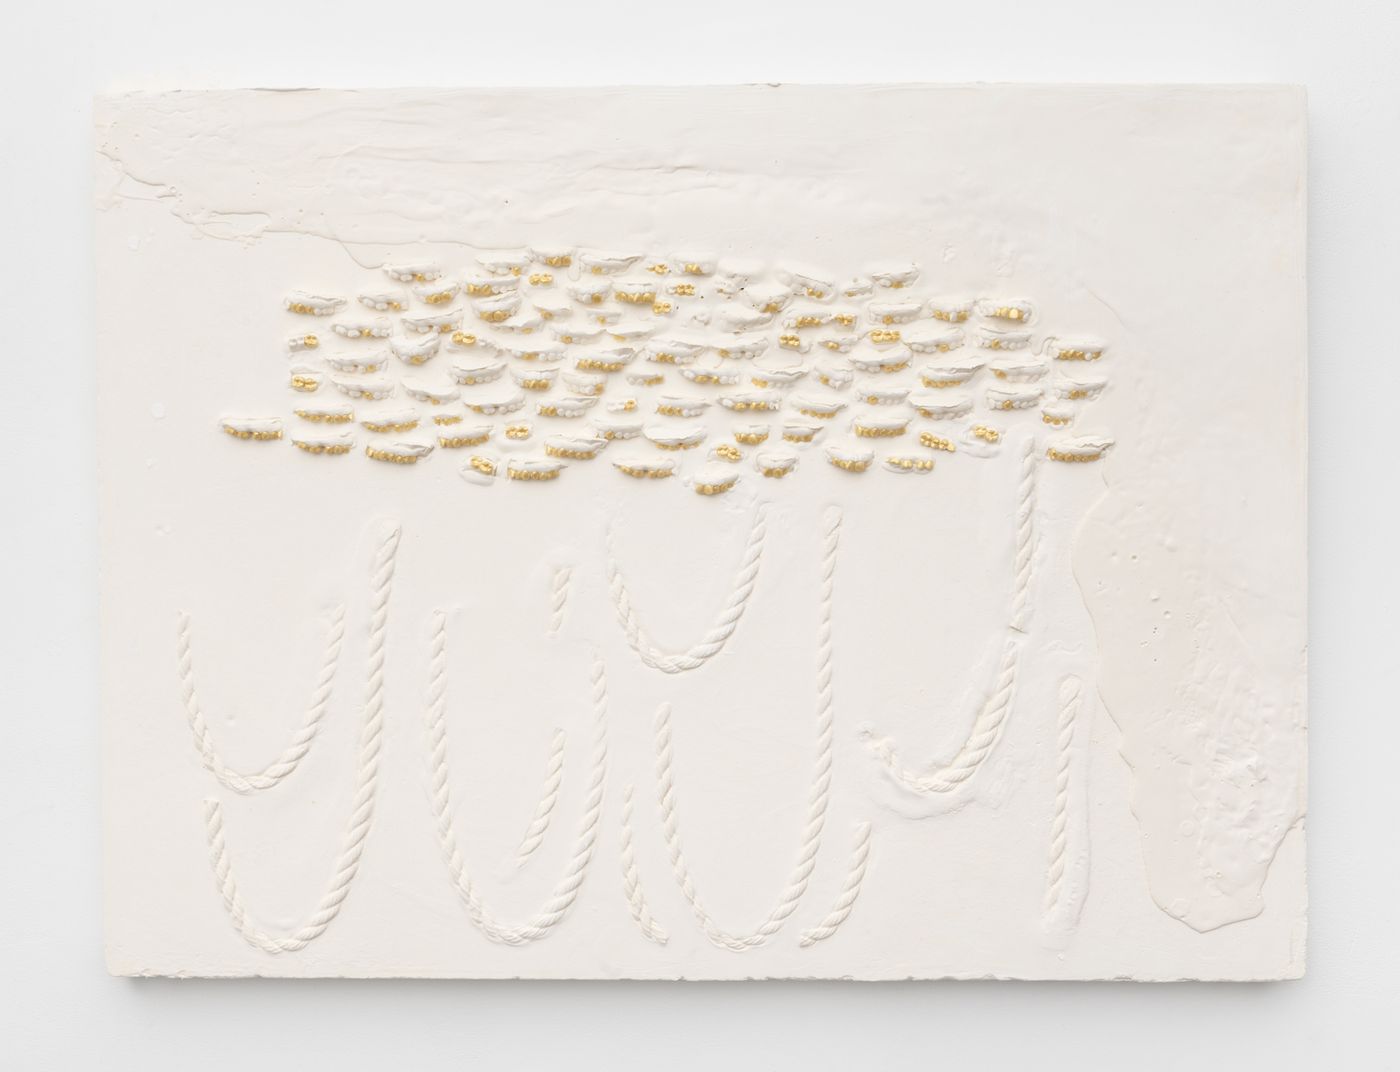 Image of Horizontal Composition with Gold Teeth and Ropes #1, 2019: Plaster and acrylic